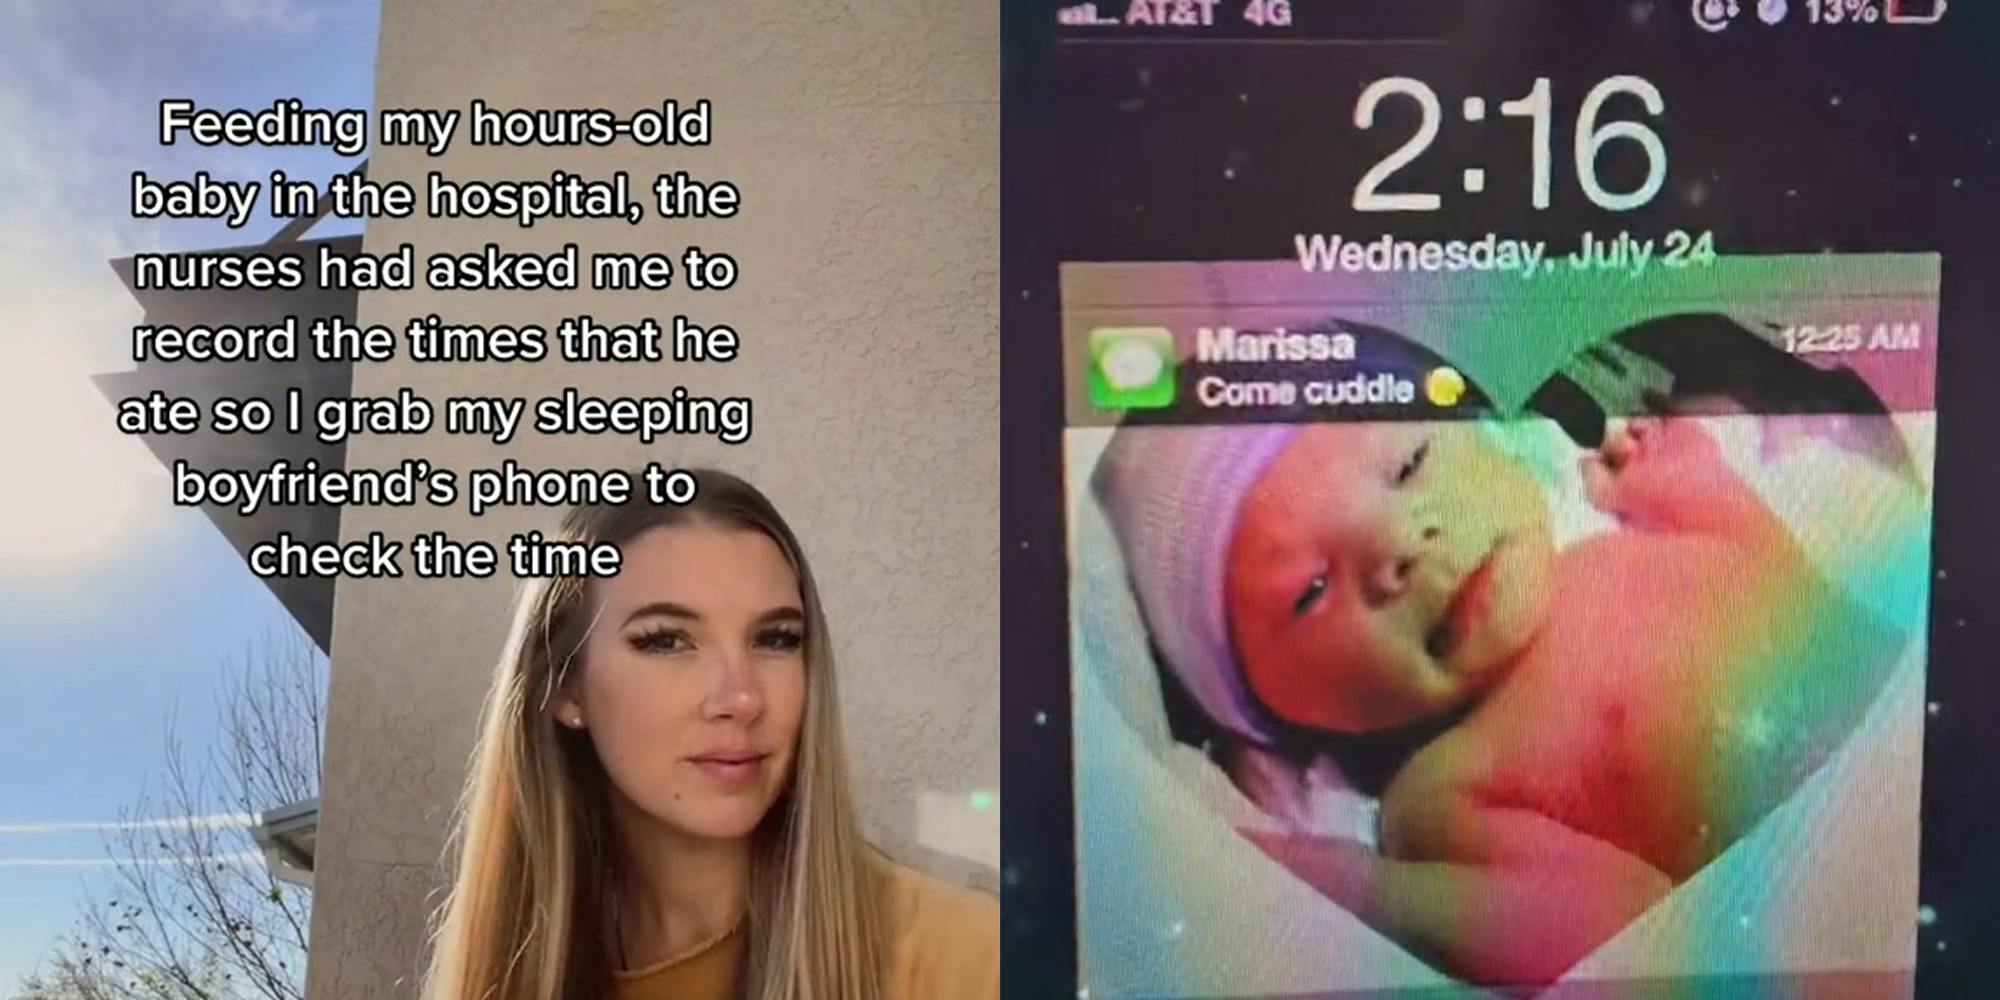 woman with caption "feeding my hours-old baby in the hospital, the nurses had asked me to record the times that he ate so I grab my sleeping boyfriend's phone to check the time" (l) screenshot of phone with newborn baby and text message preview that reads "Marissa - Come cuddle" (r)